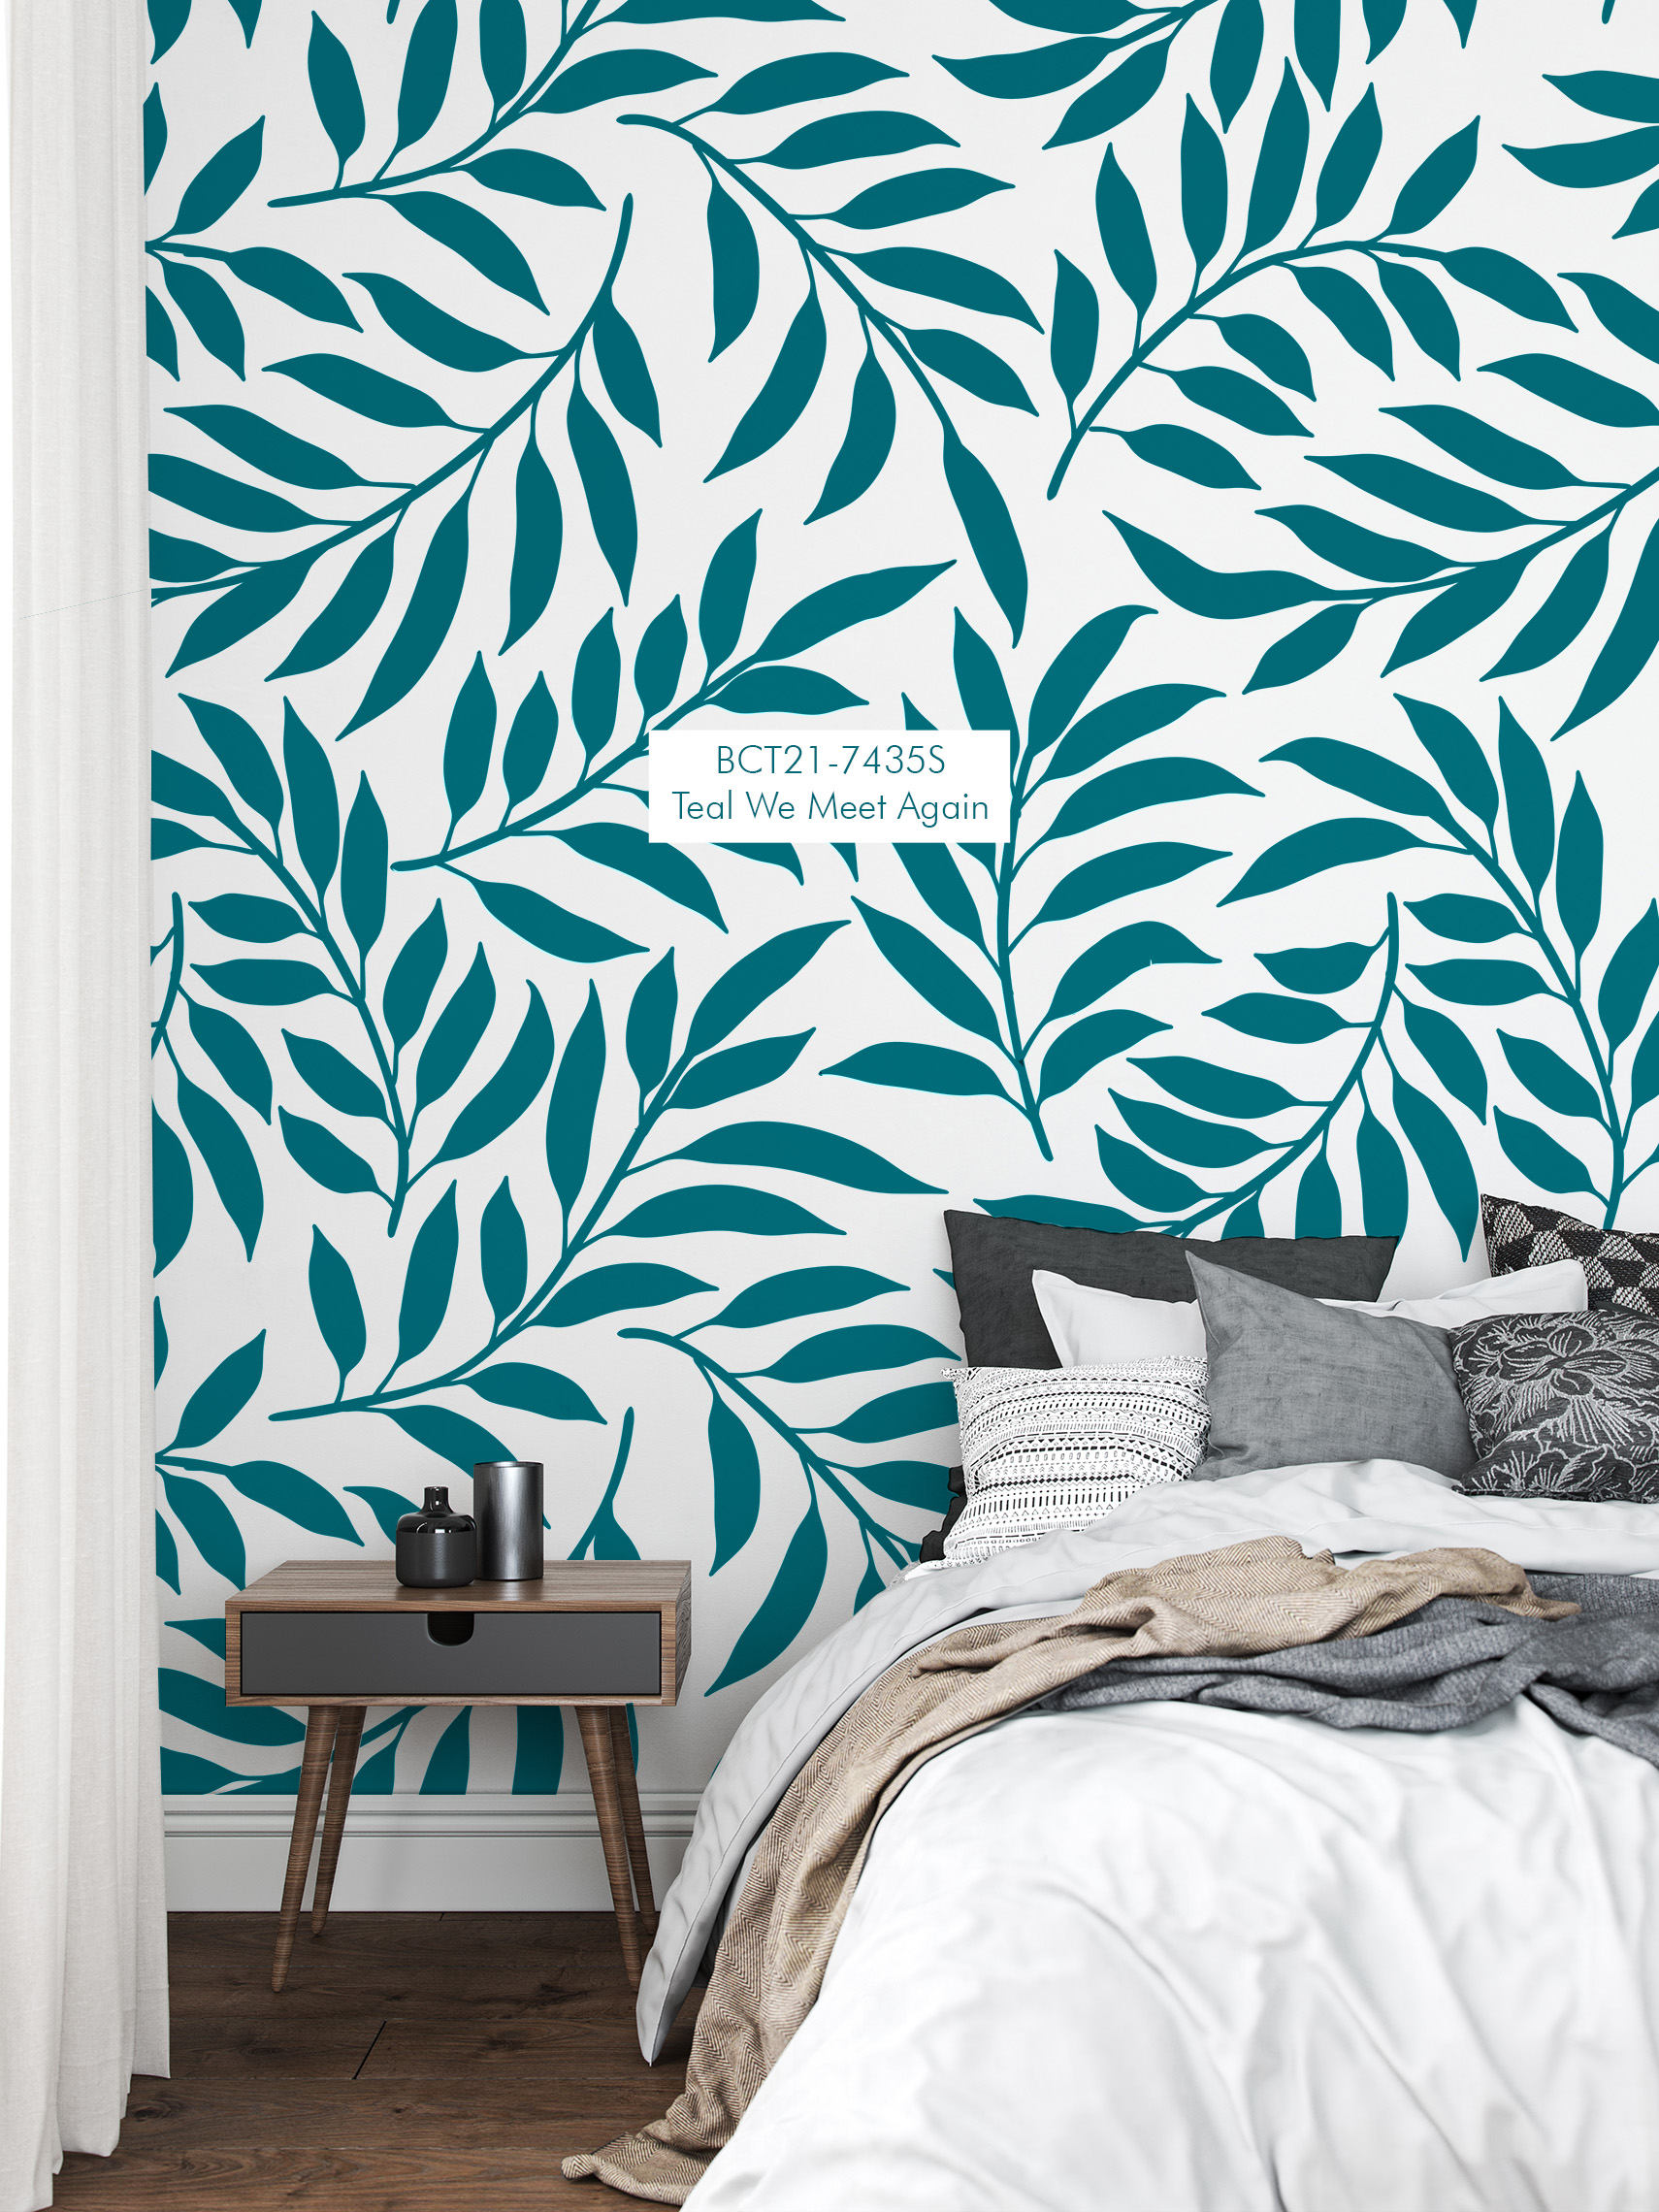 Wall Color Ideas for Your Bedroom with the Bloom Palette | MyBoysen